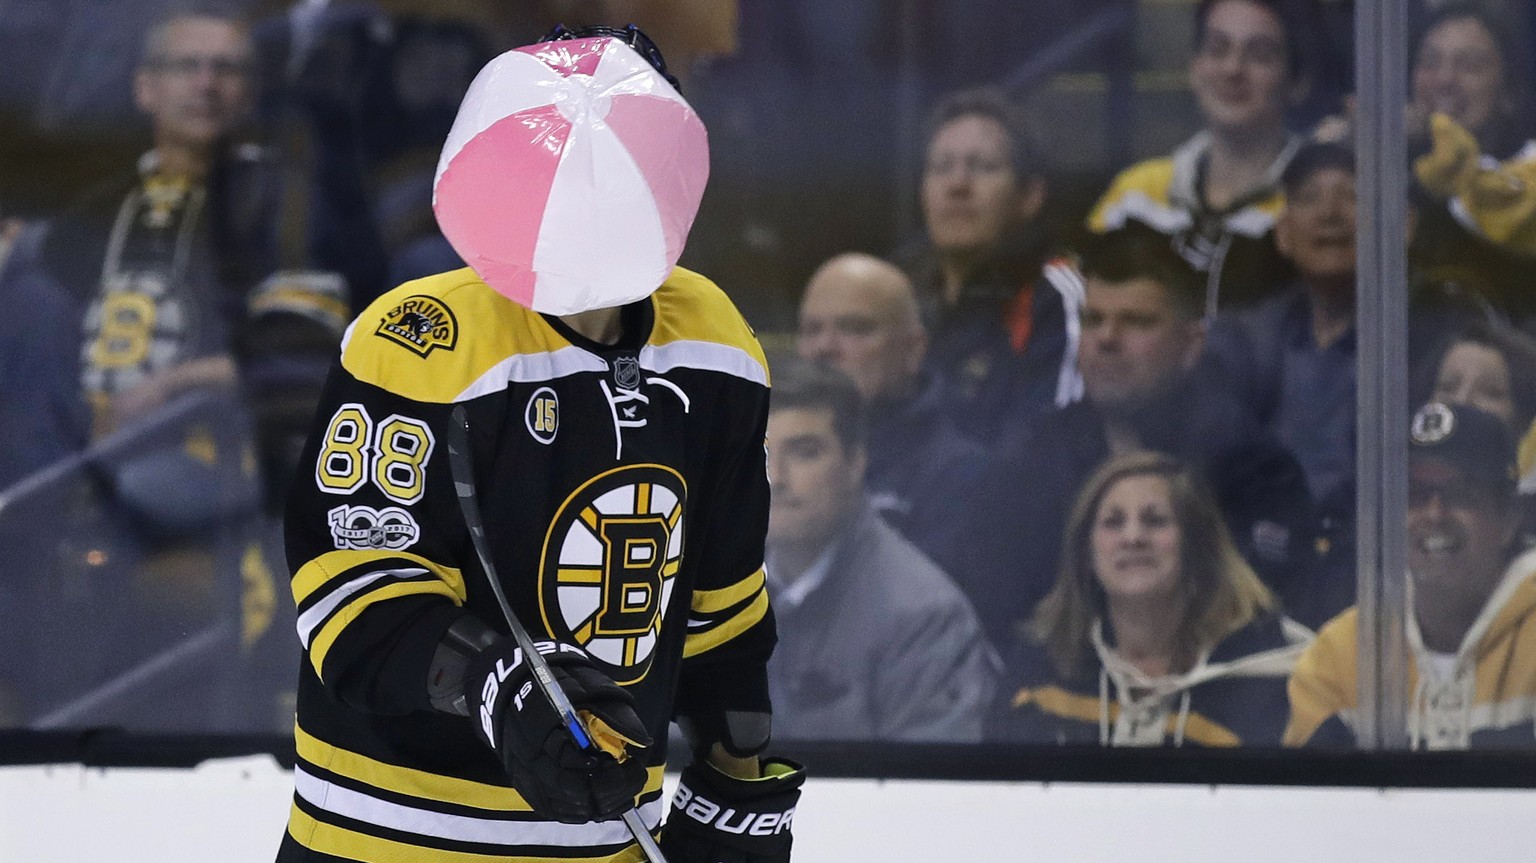 Boston Bruins left wing David Pastrnak juggles a beach ball which landed on the ice during the second period against the Ottawa Senators in Game 4 of a first-round NHL hockey playoff series in Boston, ...